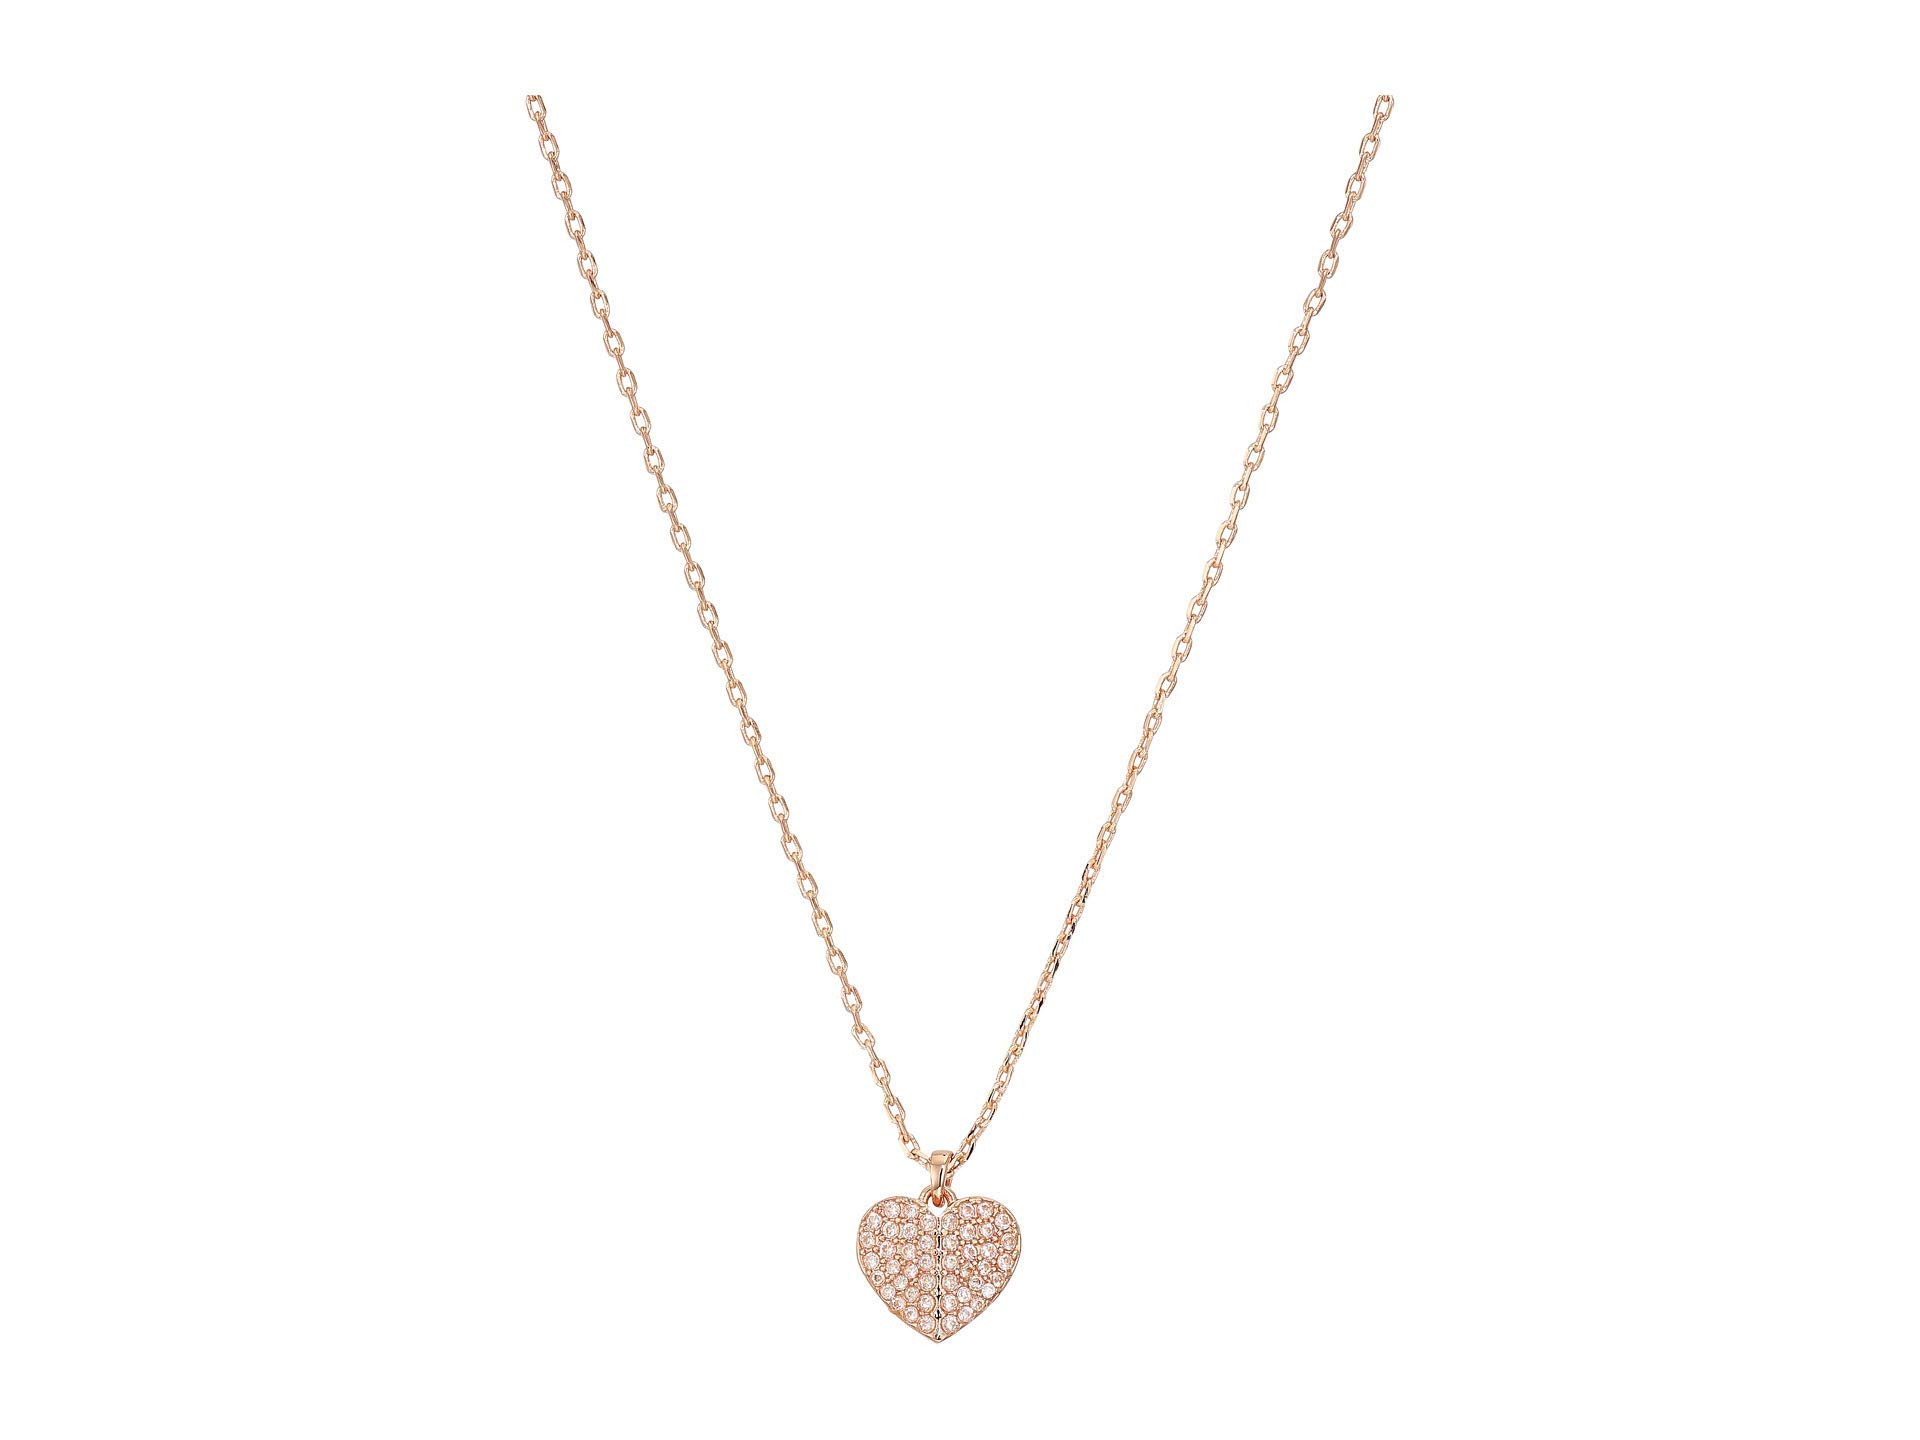 Kate Spade New York Heart to Heart Pave Mini Pendant Necklace